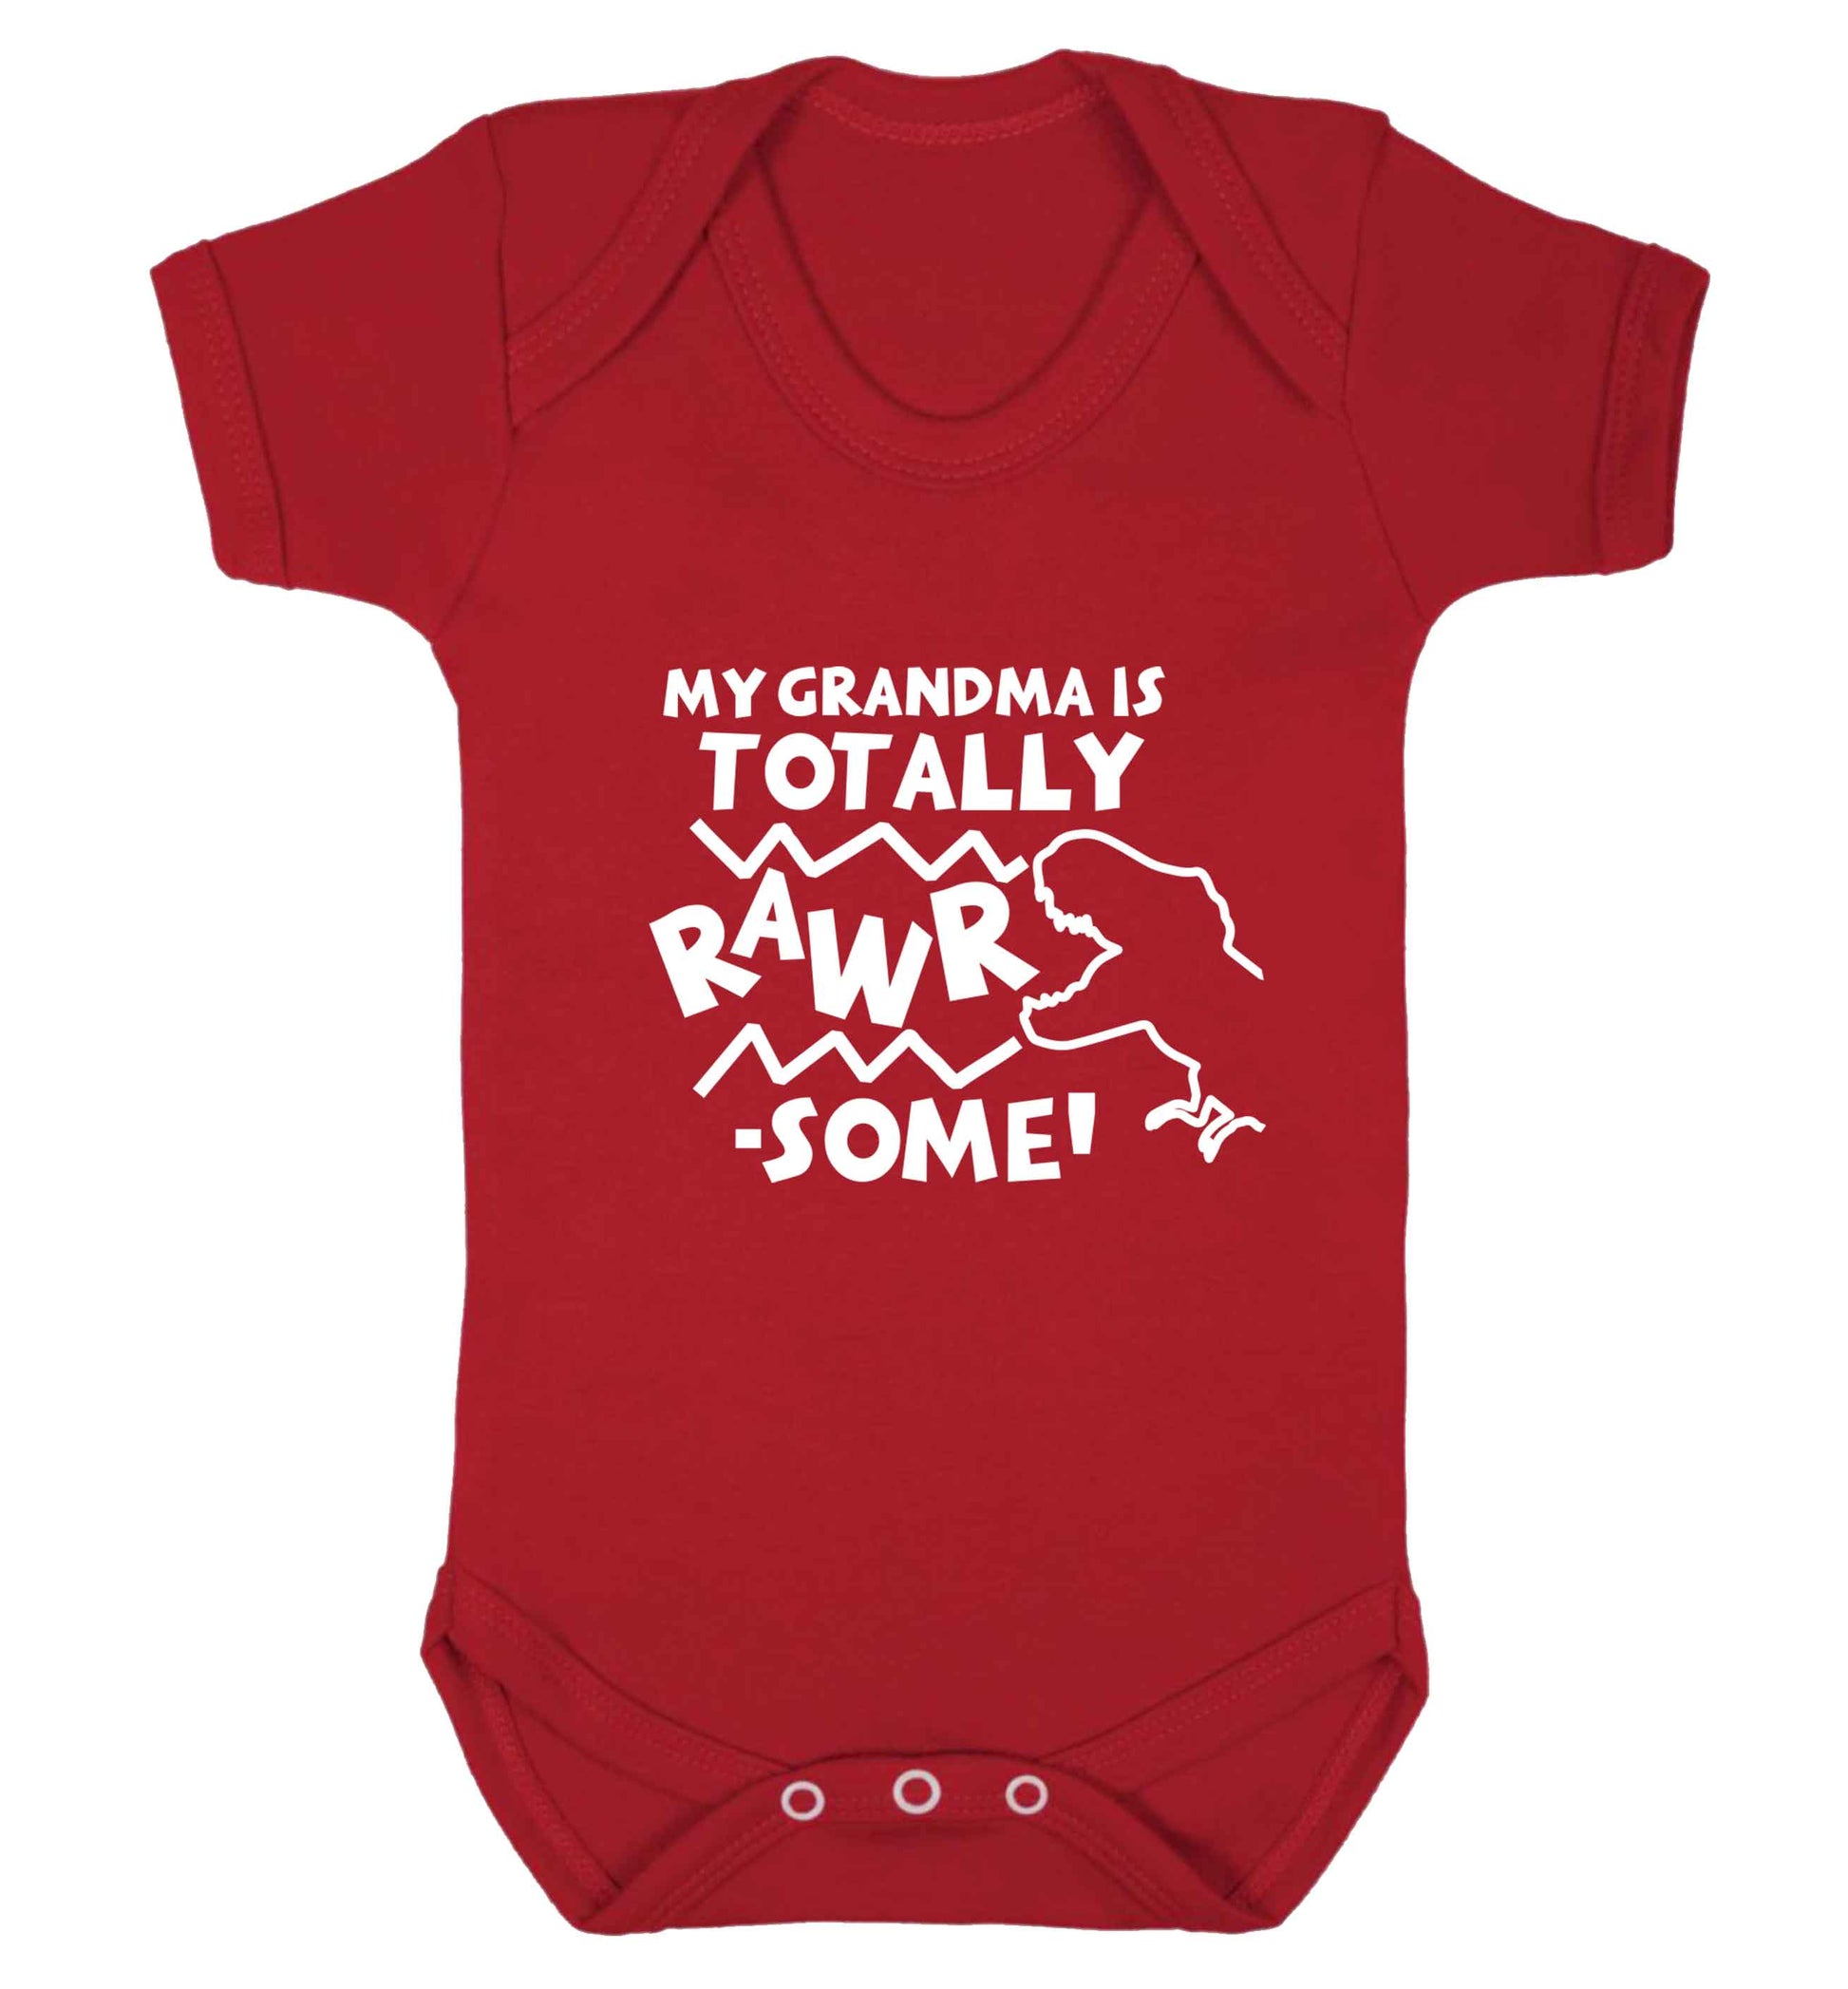 My grandma is totally rawrsome baby vest red 18-24 months